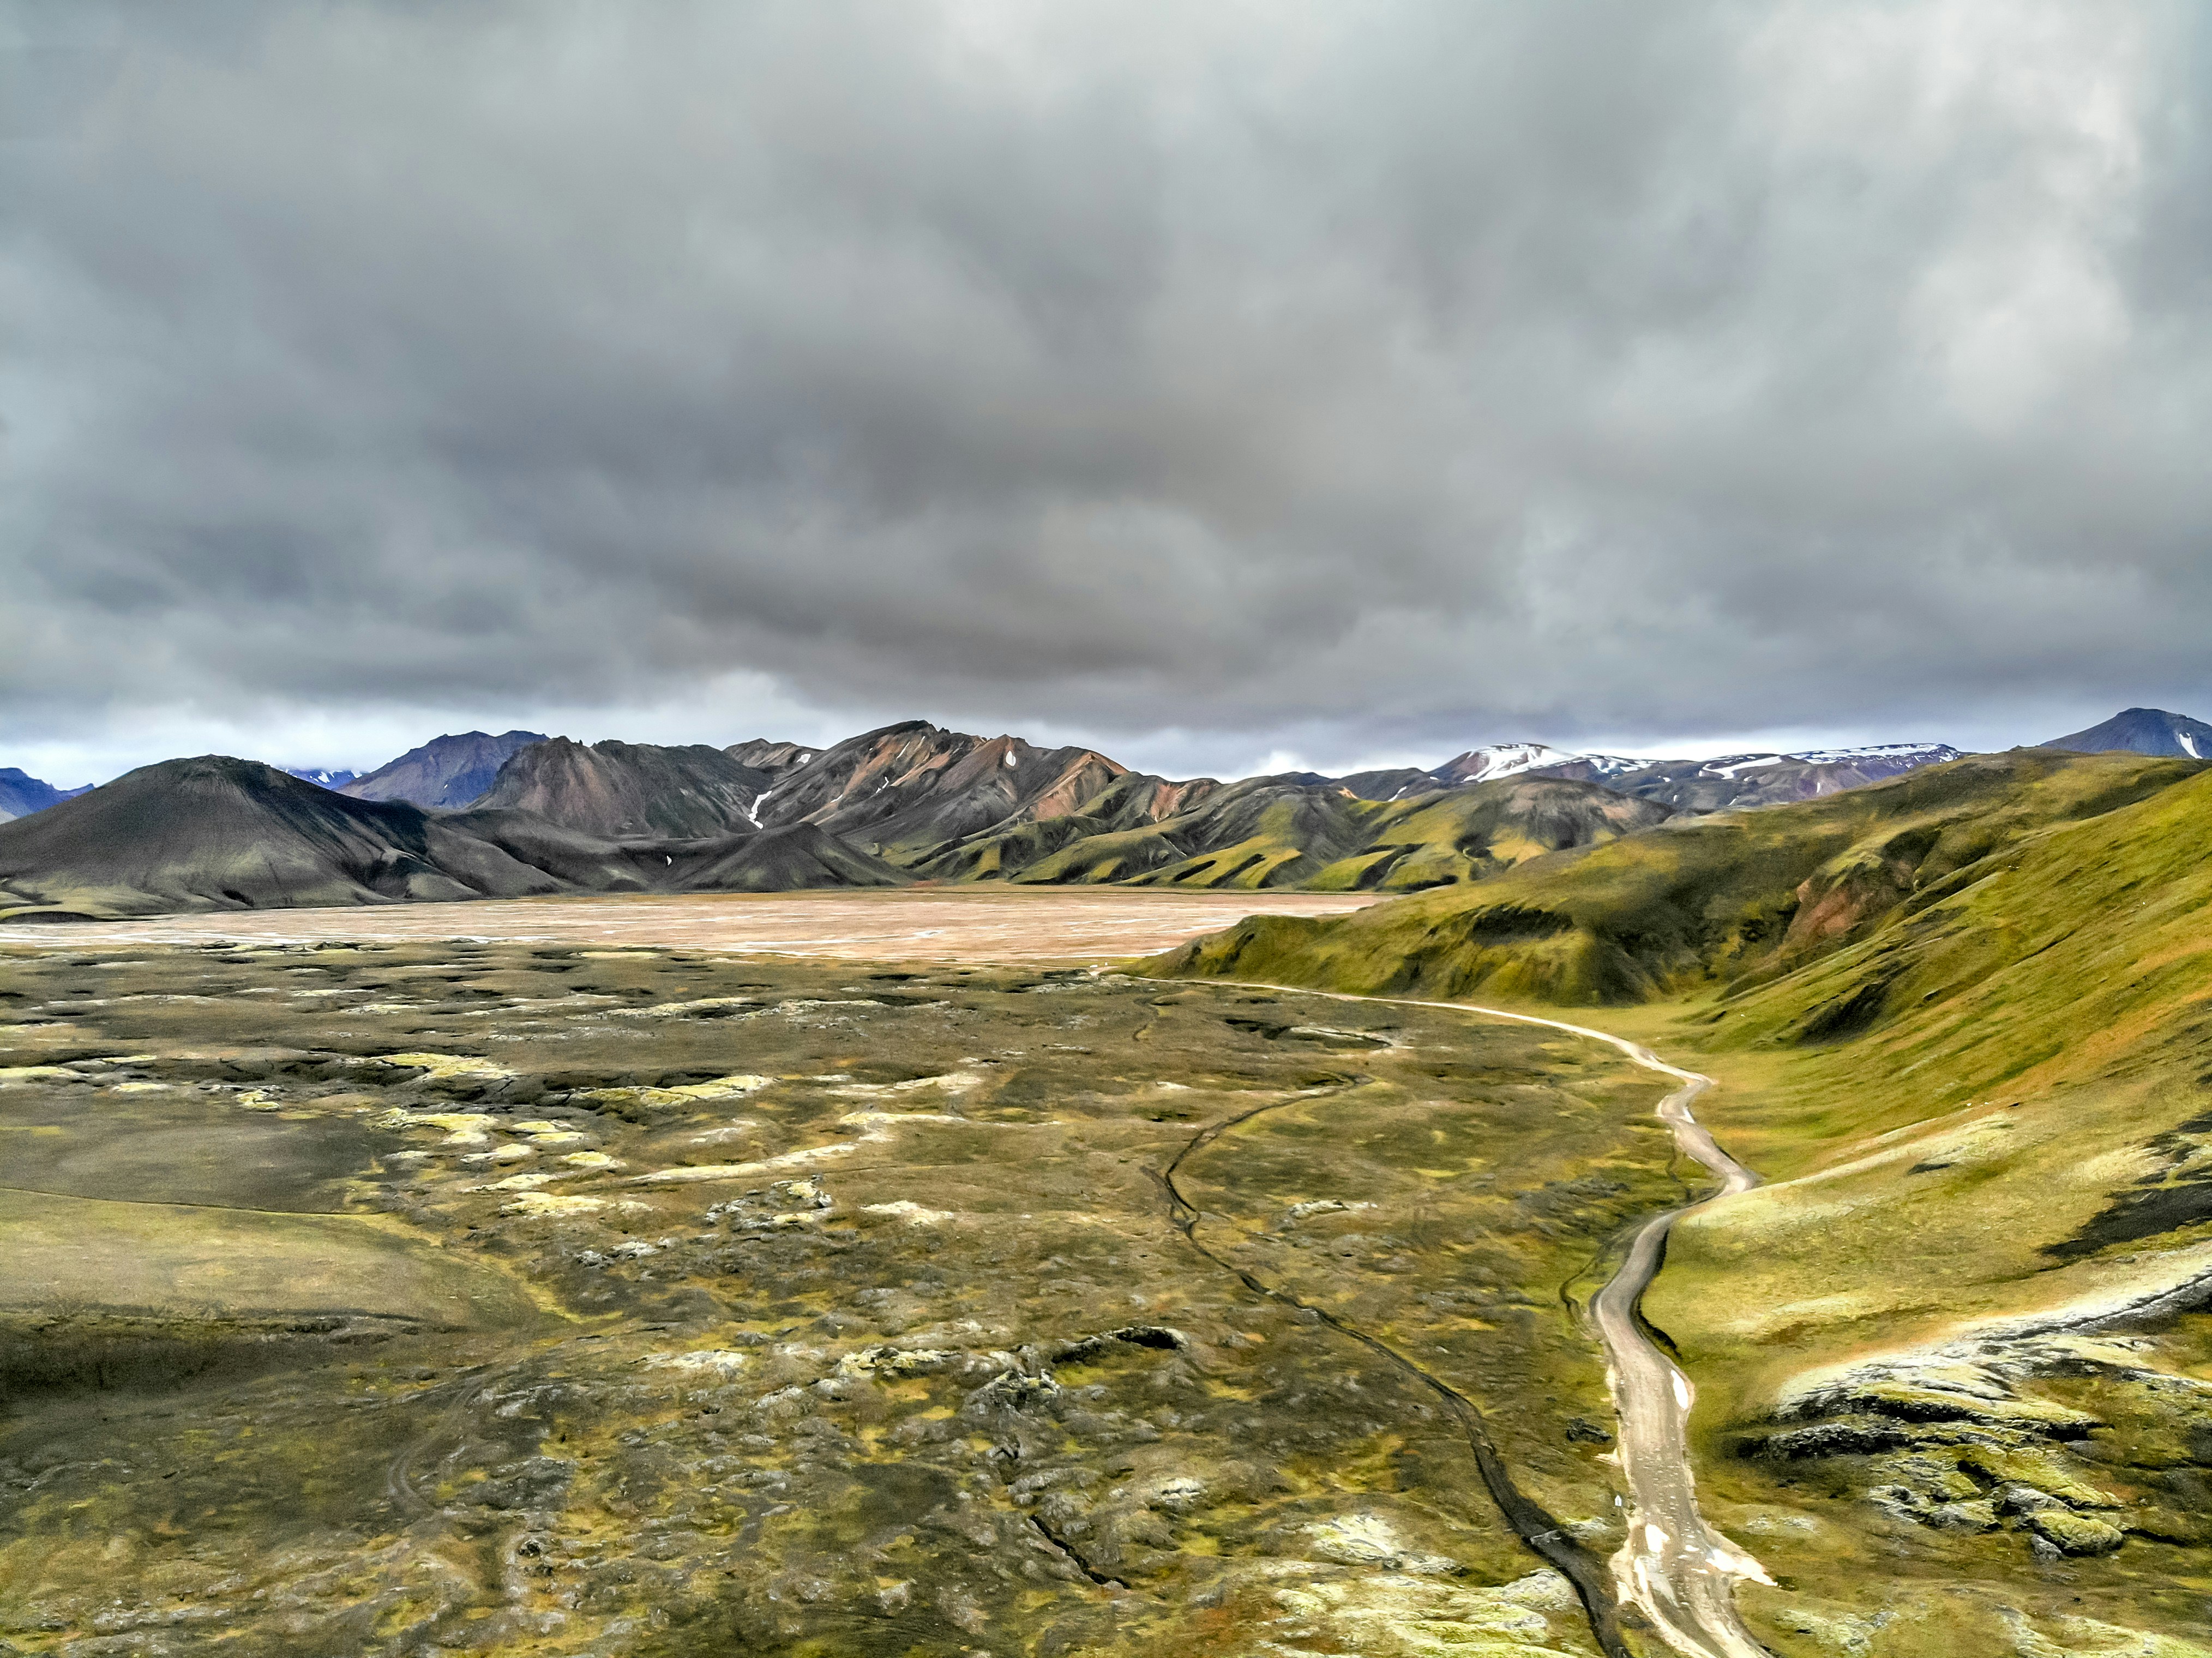 Landmannalaugar, Iceland - one the most beautiful places in Iceland. The drive to this place via the F-Roads, the sceneries, the numerous lakes, snow capped mountains, etc… all of this just adds fuel to the fire.